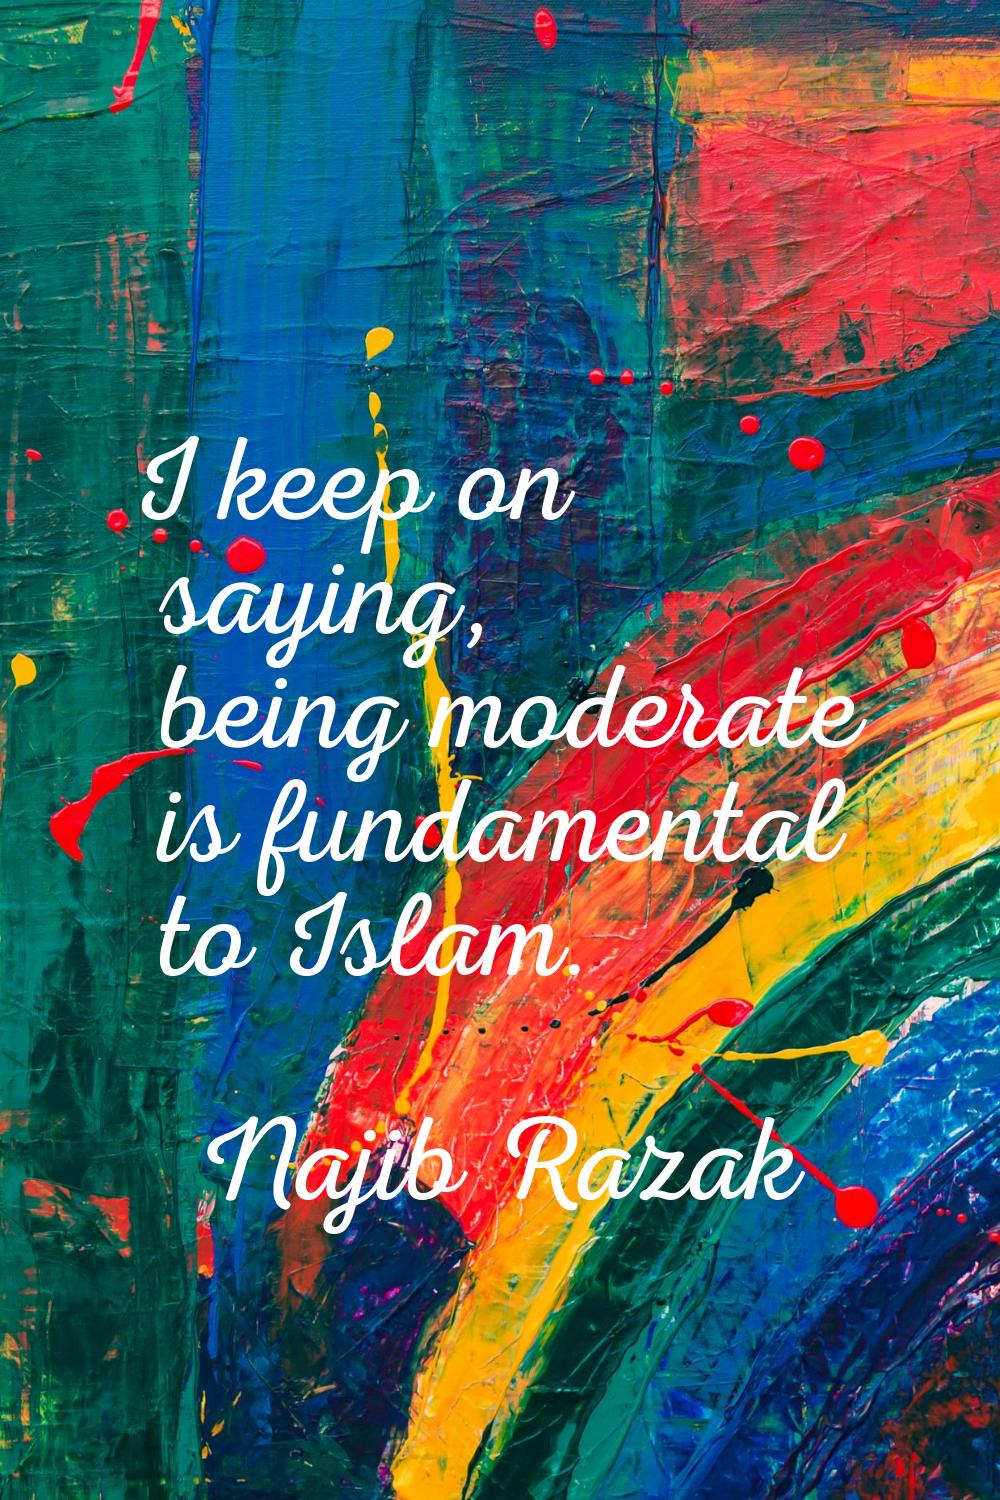 I keep on saying, being moderate is fundamental to Islam.